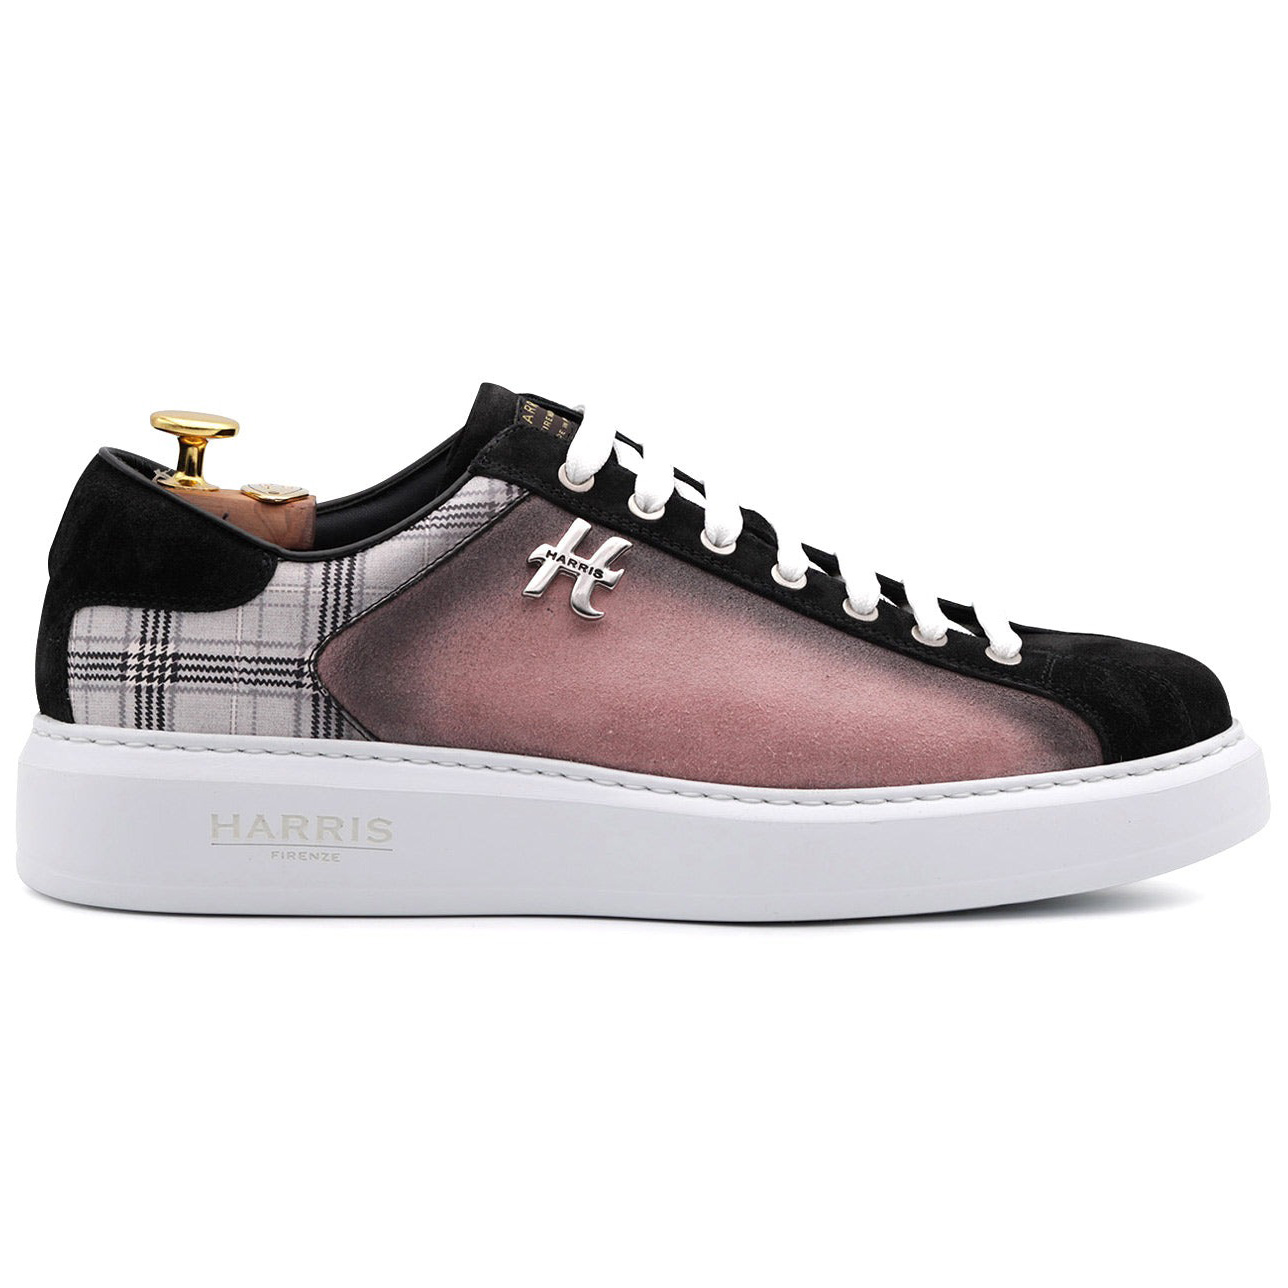 Harris Firenze 1913 Textured Leather Sneakers Rose Image